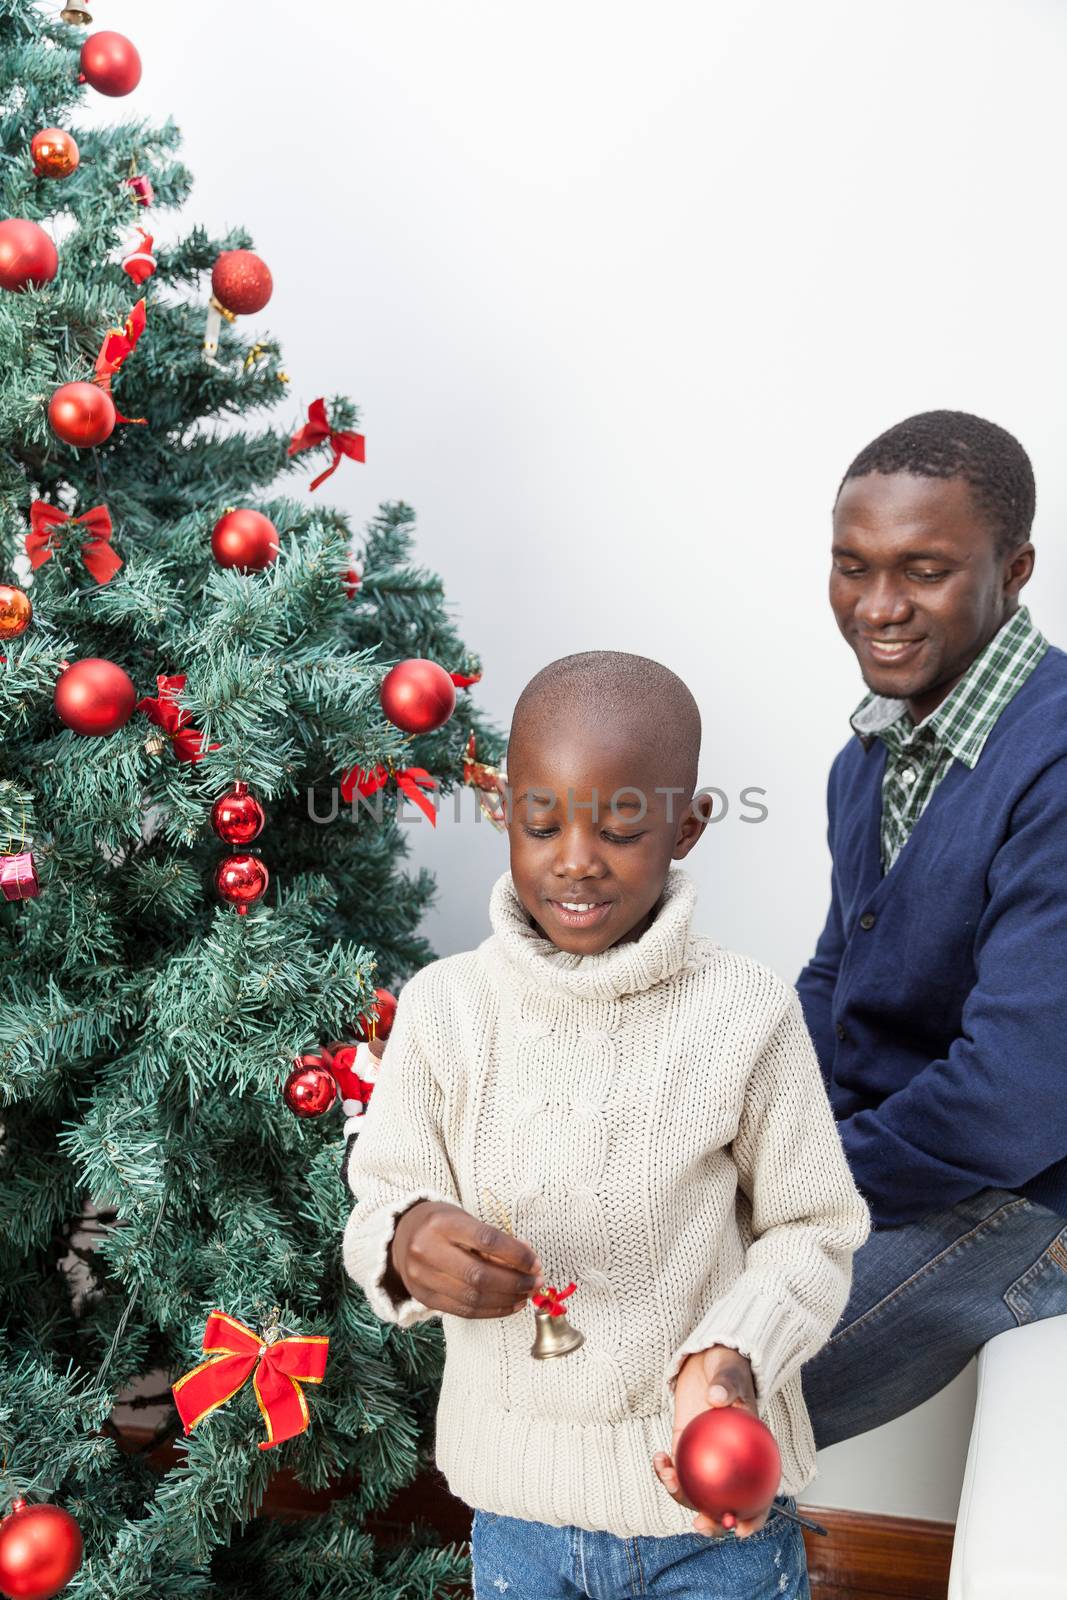 30-35, 4-6, african, apartment, ball, balls, black, boy, celebration, child, christmas, cute, decoration, family, festive, happy, home, homey, house, joyful, kid, life, lifestyle, little, living, love, male, model, old, one, person, portrait, pretty, property, relationship, releases, room, time, tree, vertical, years, young, father, smile